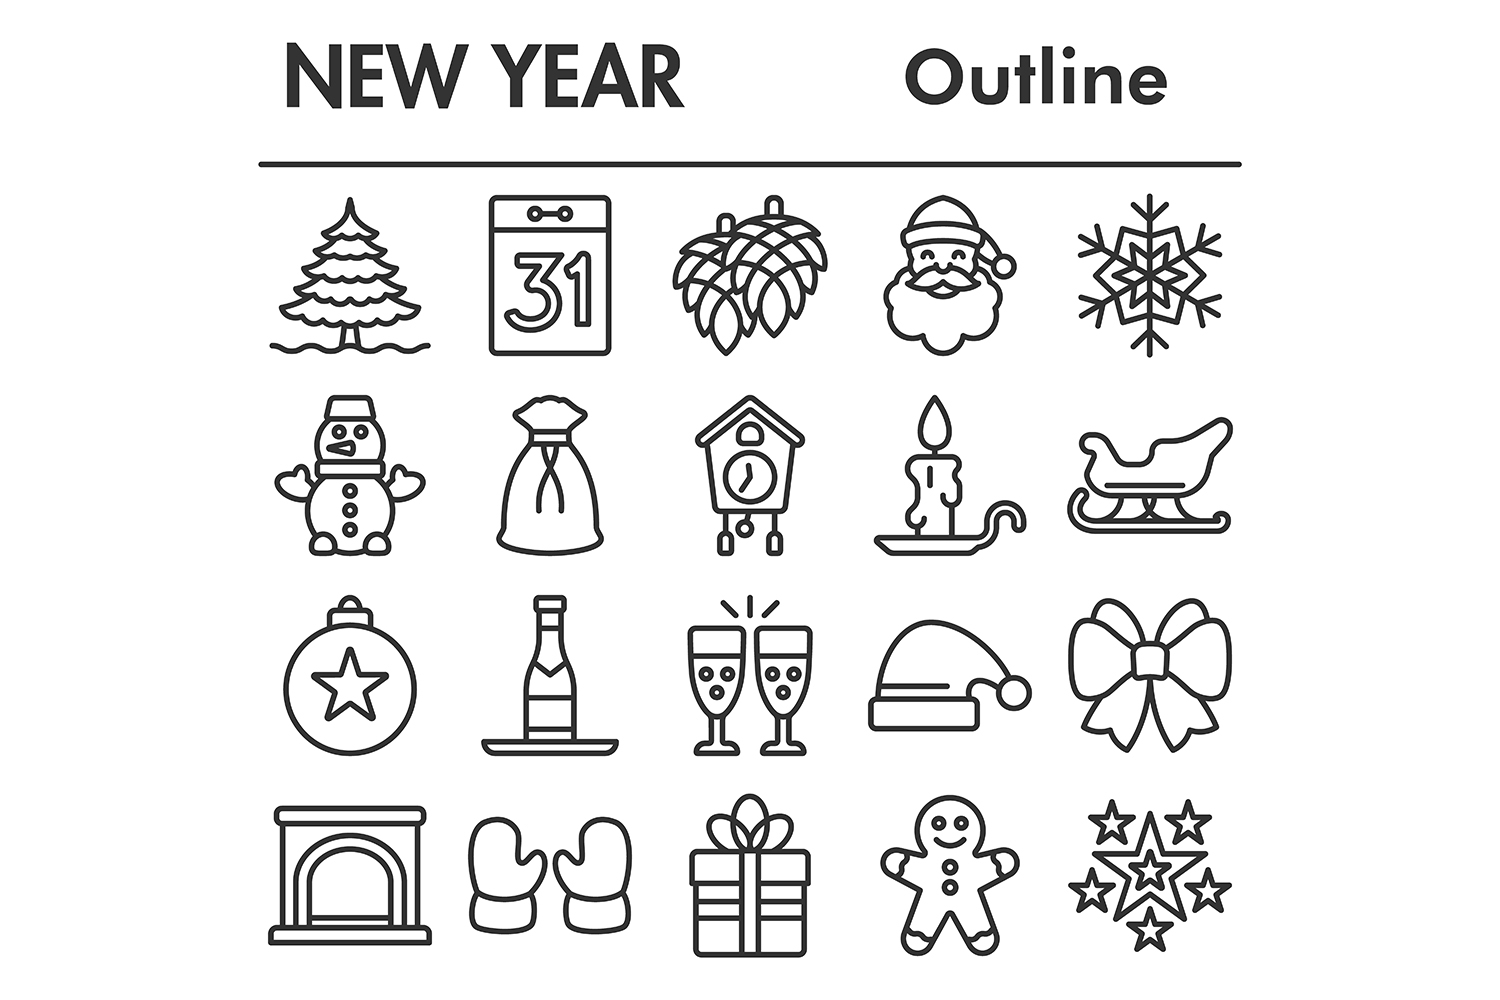 New Year icons set, outline style pinterest preview image.